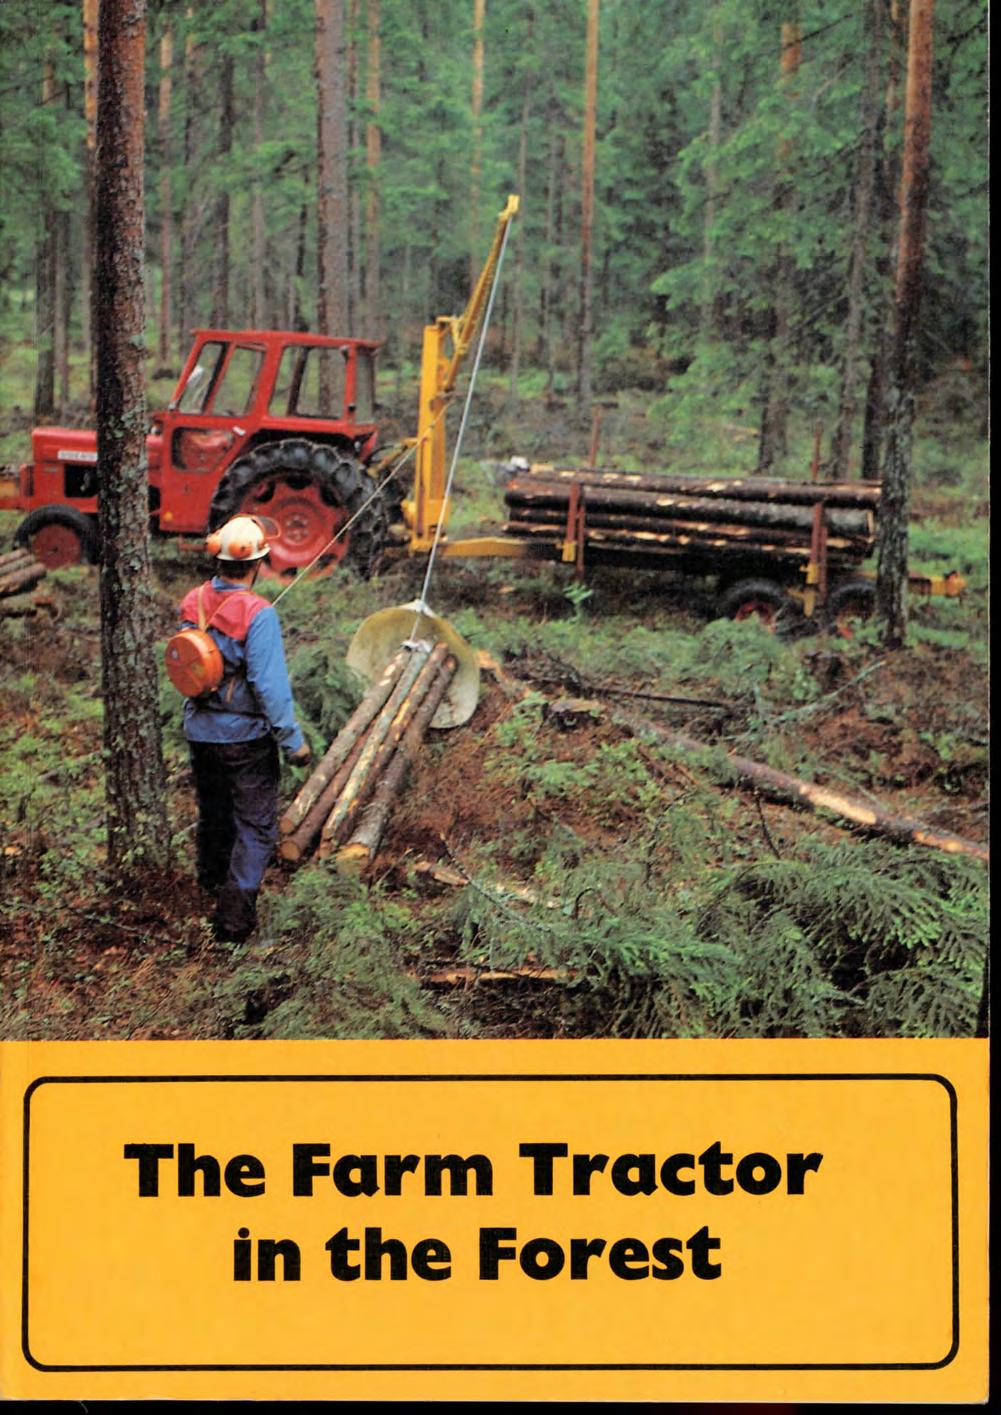 The Farm Tractor in the Forest